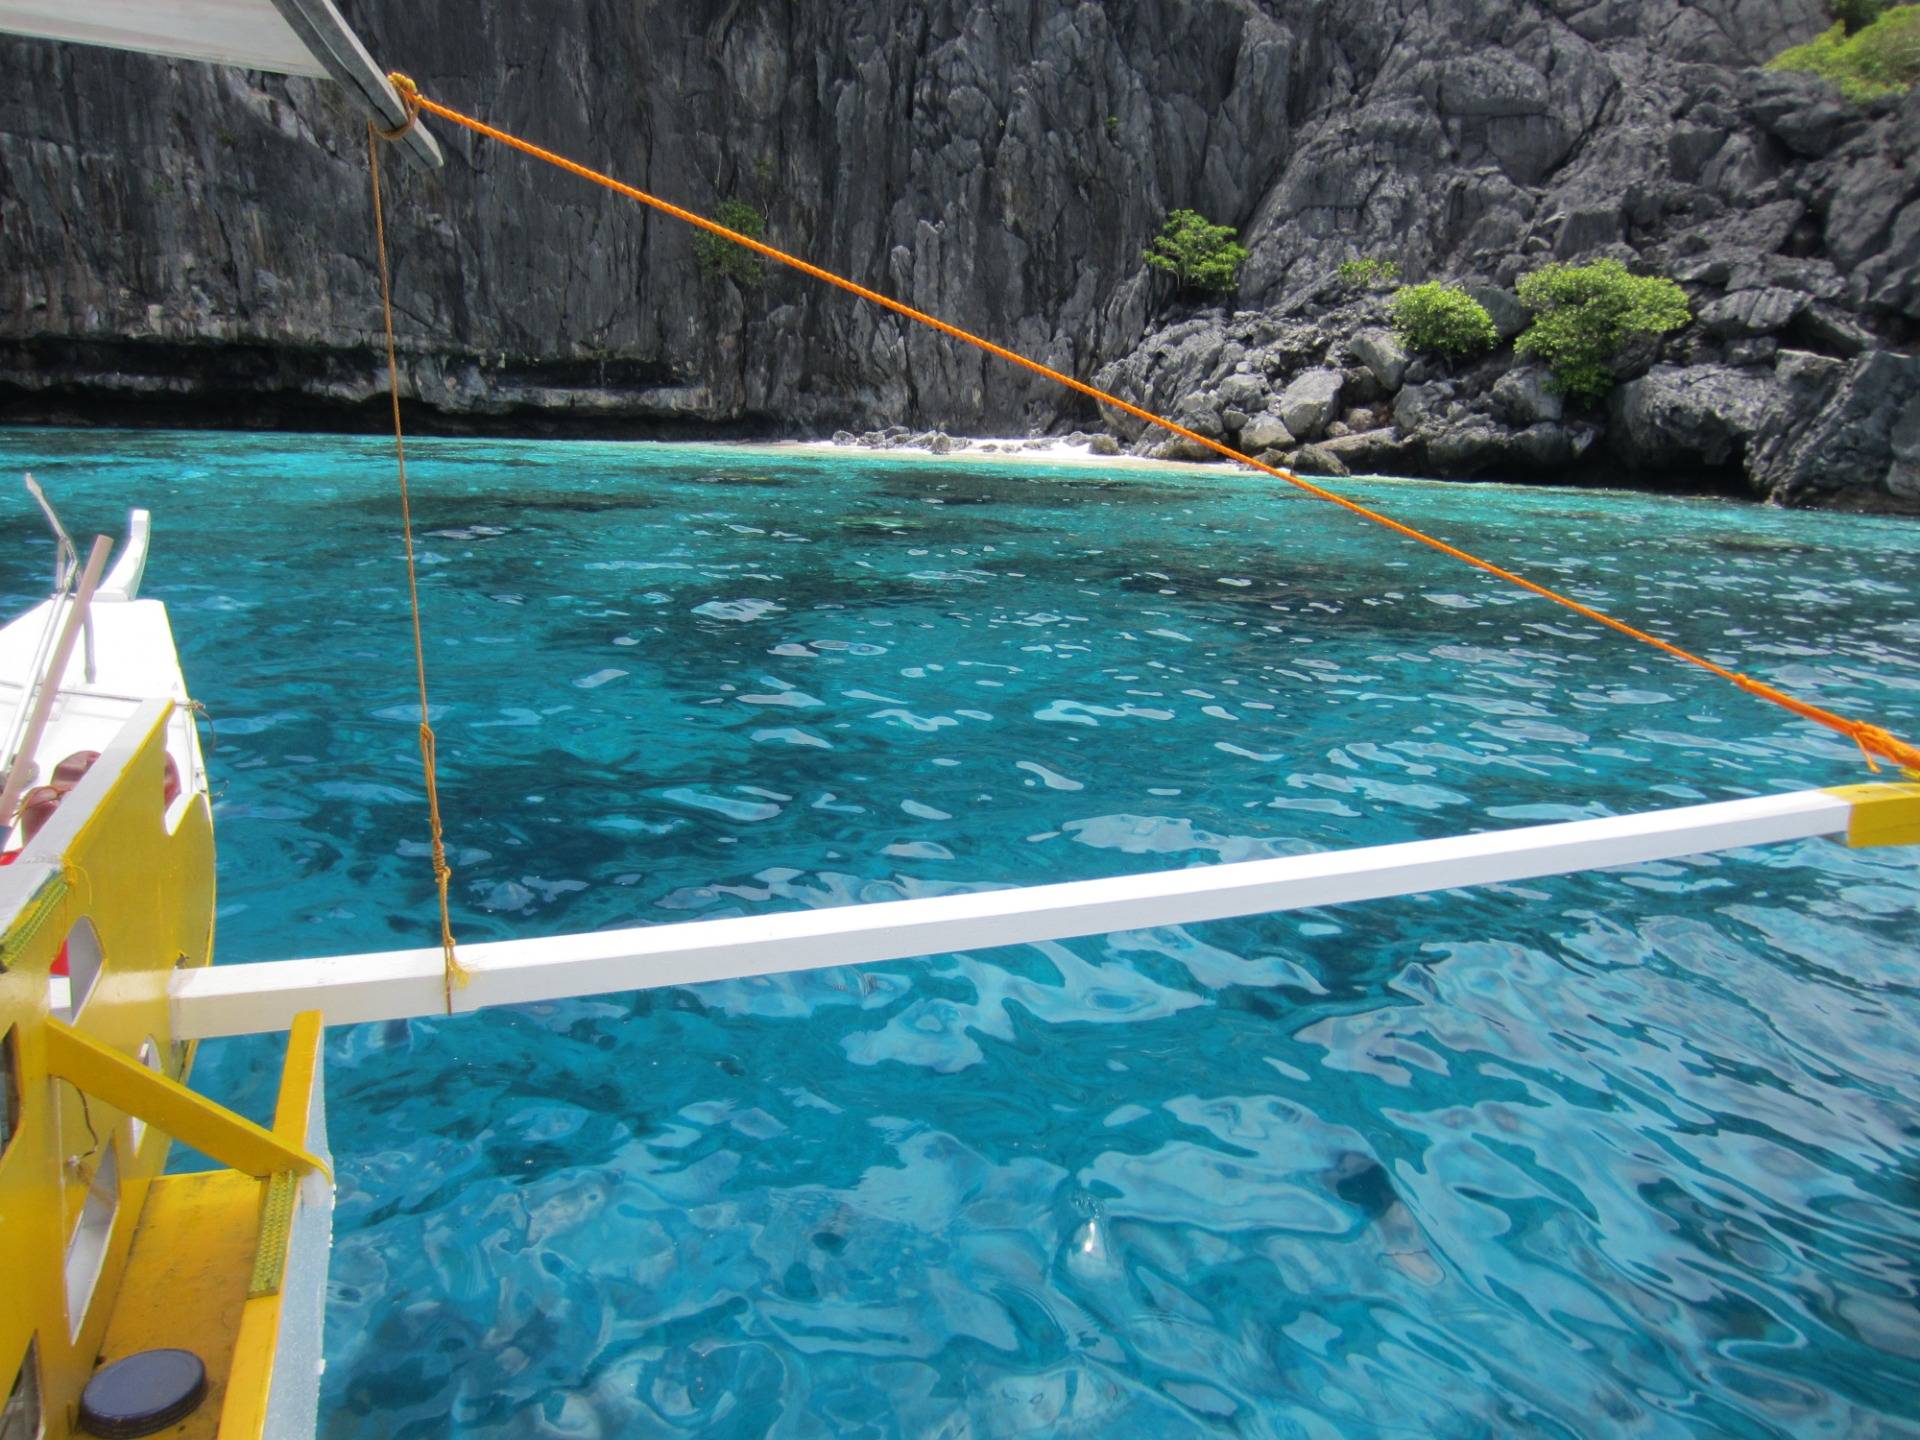 Turquoise teal water awaits.